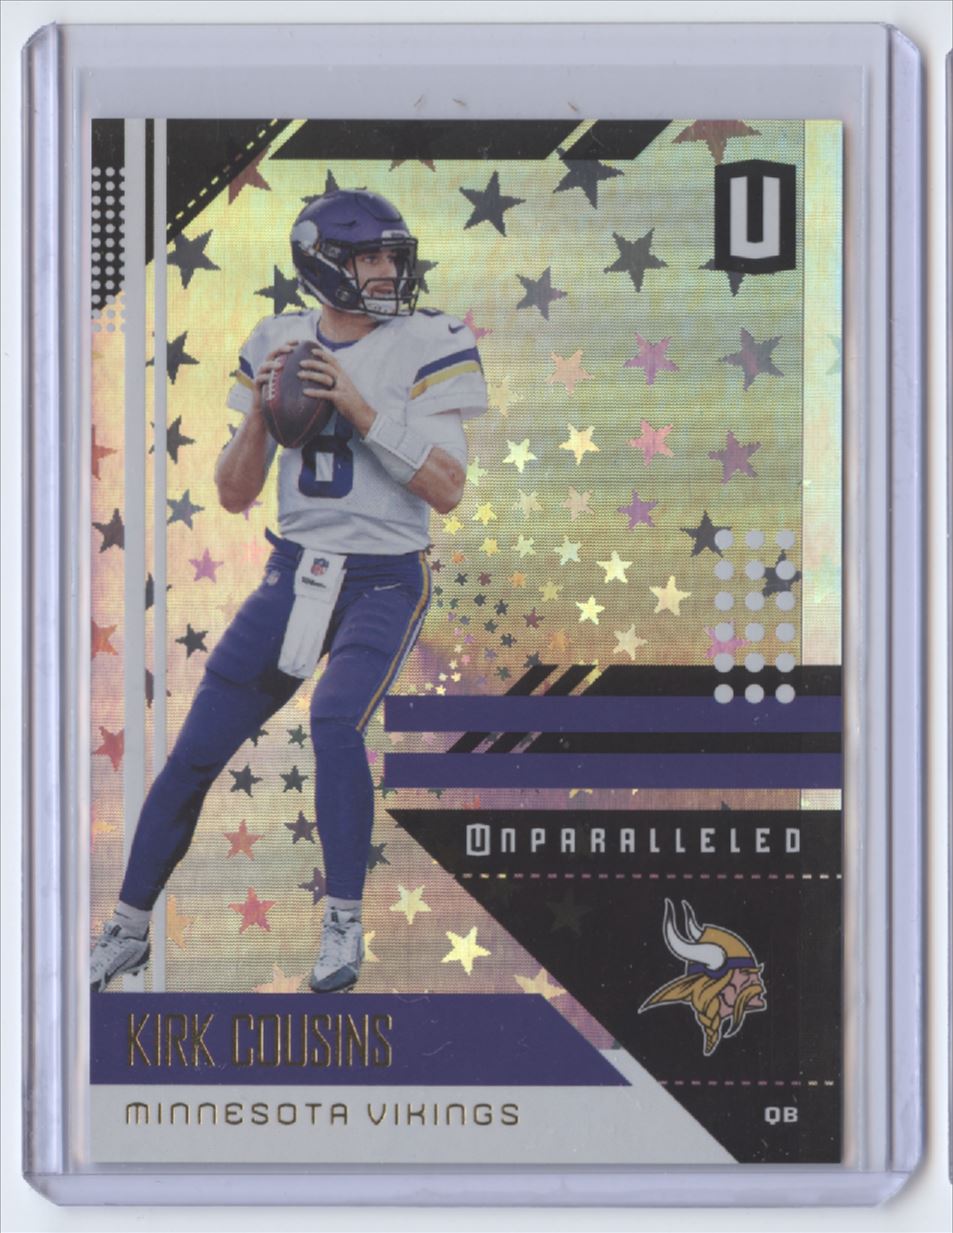 2018 Unparalleled Football Astral #120 Kirk Cousins SER200 Minnesota Vikings NFL Trading Card made by Panini